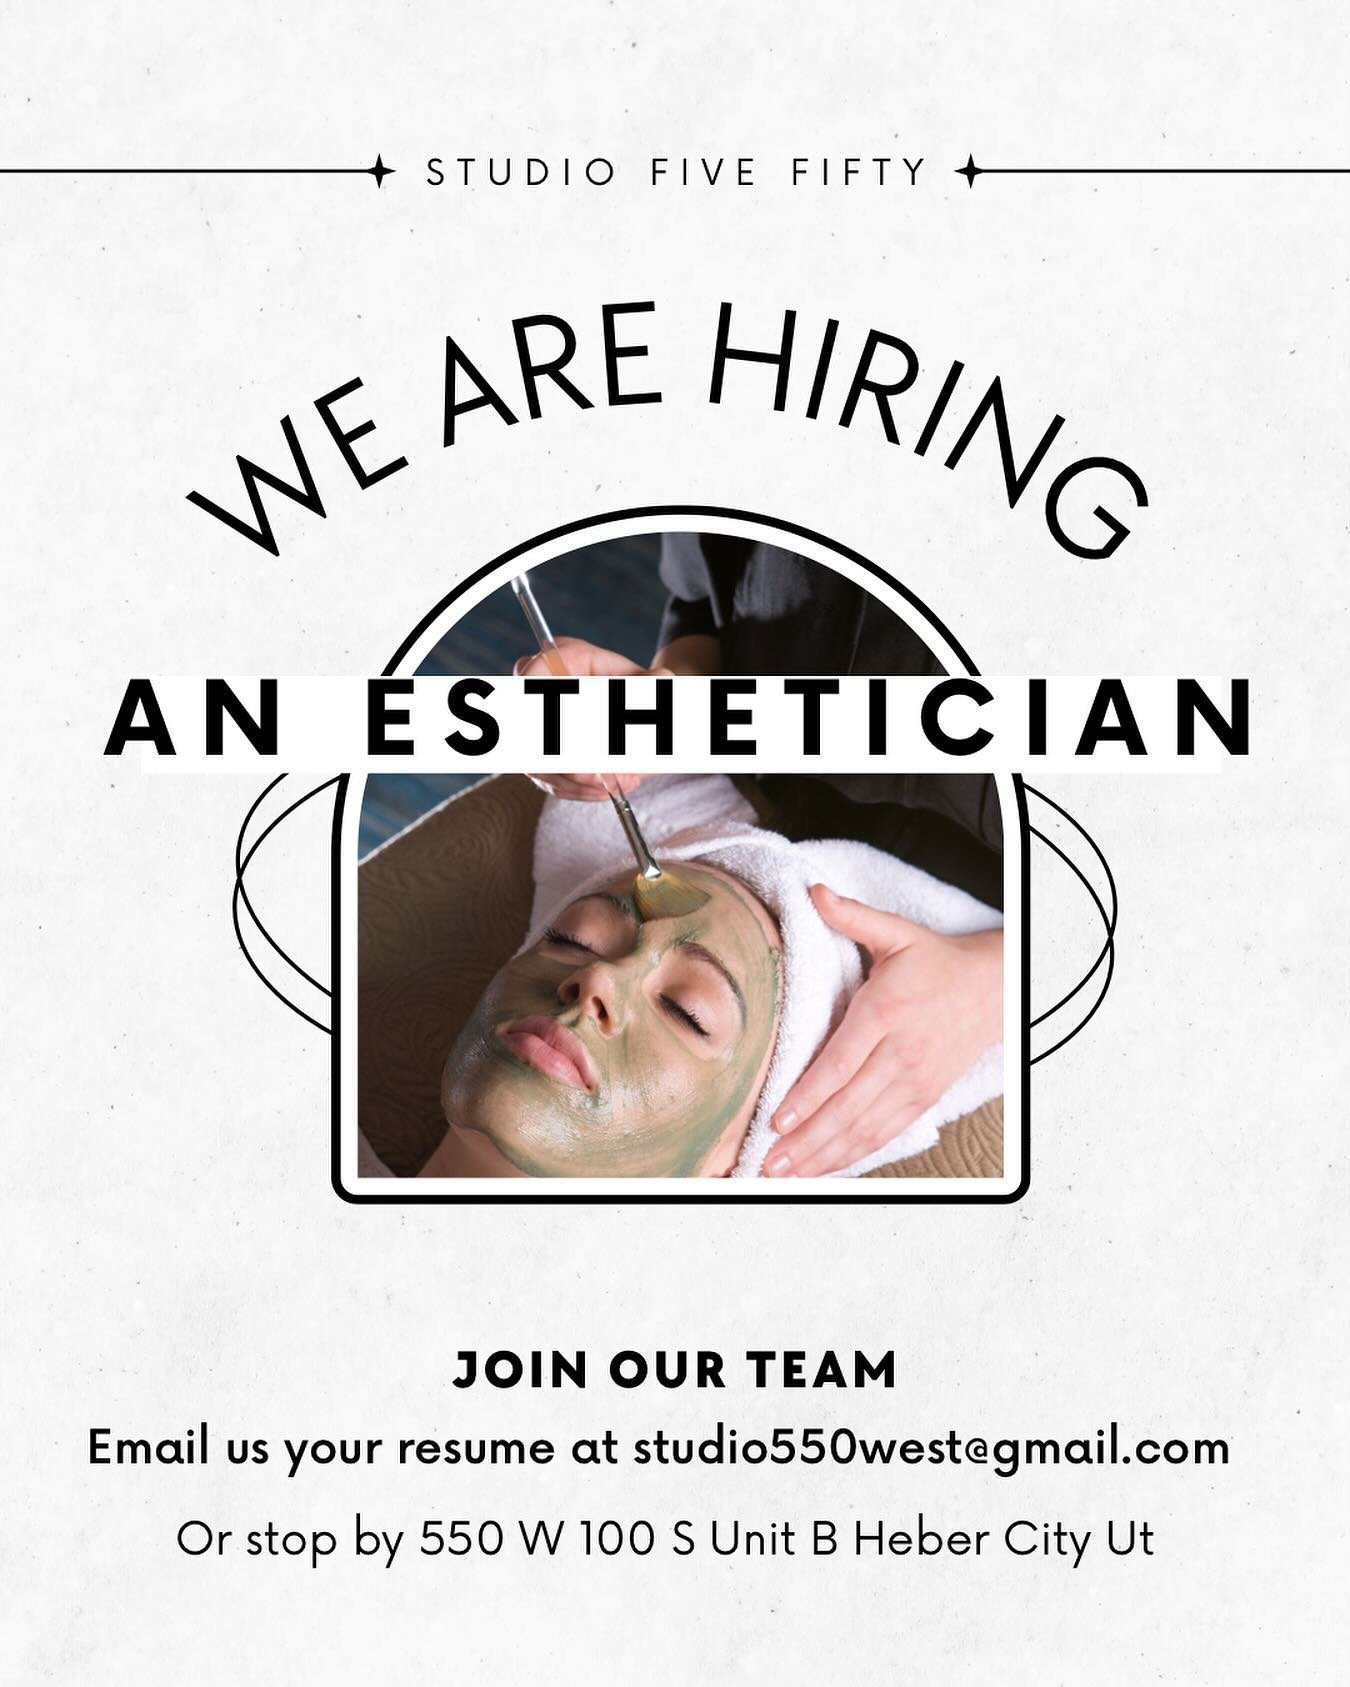 Join our team! Message us if you have any questions🫶🏼

#utahesthetician #utahhairstylist